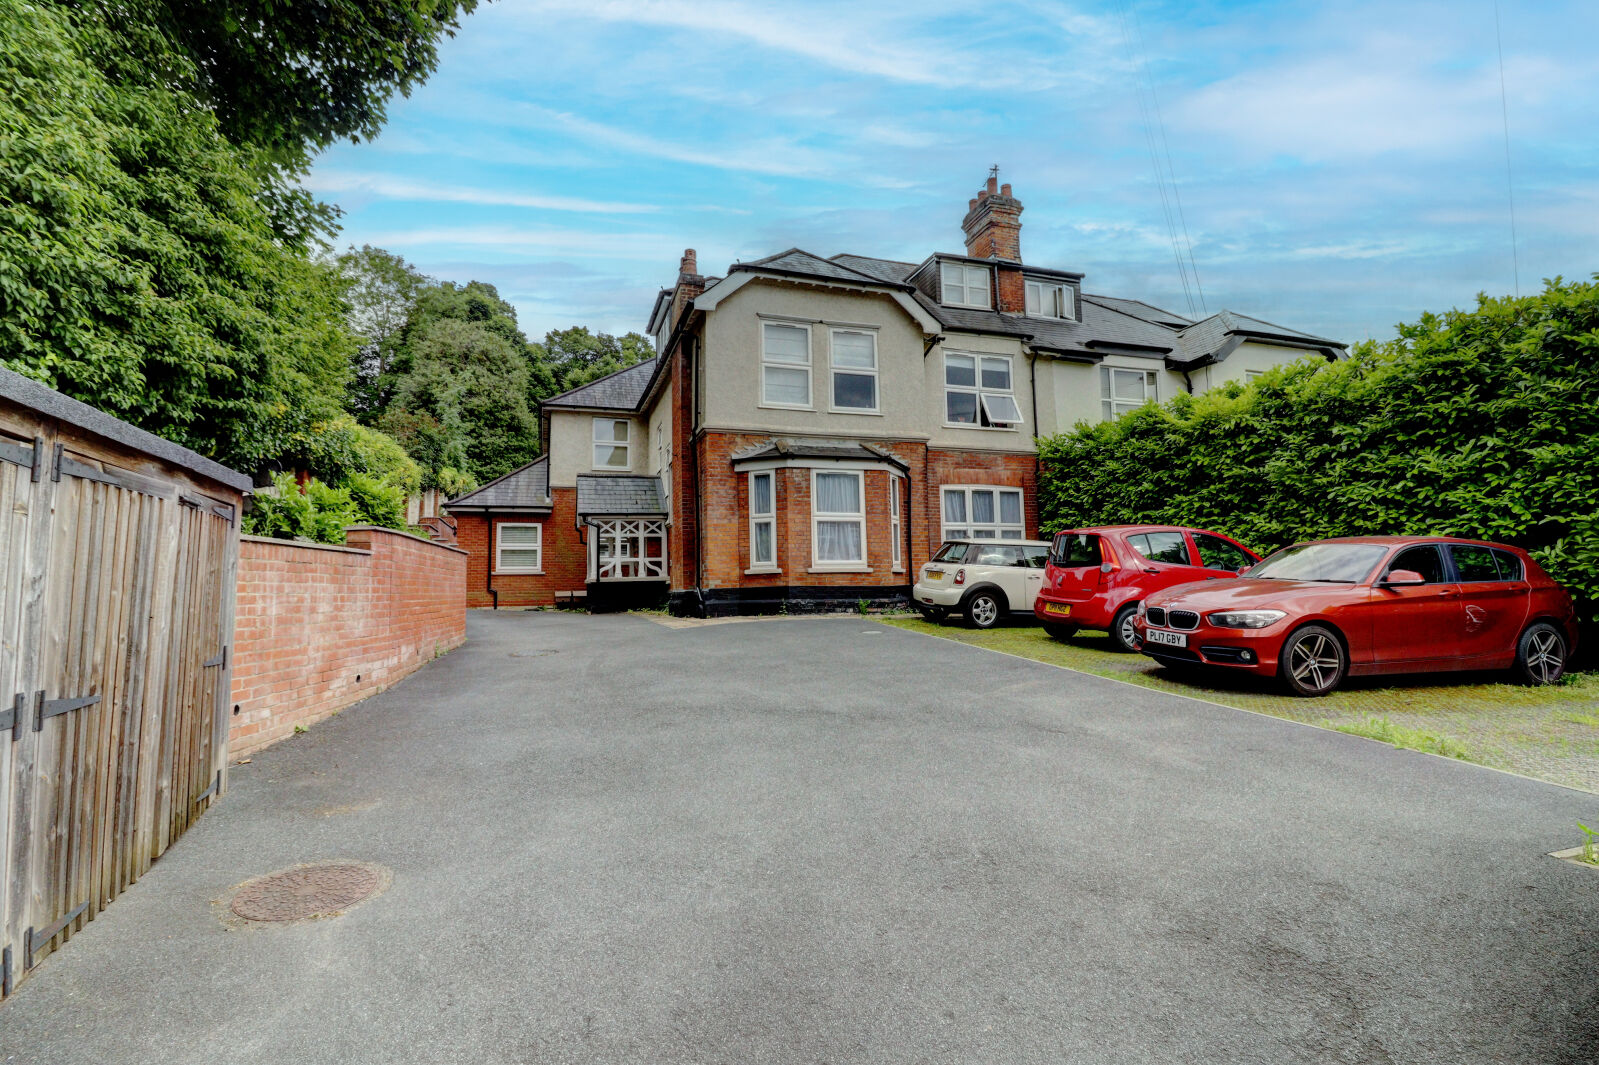 2 bedroom  flat for sale Amersham Hill, High Wycombe, HP13, main image